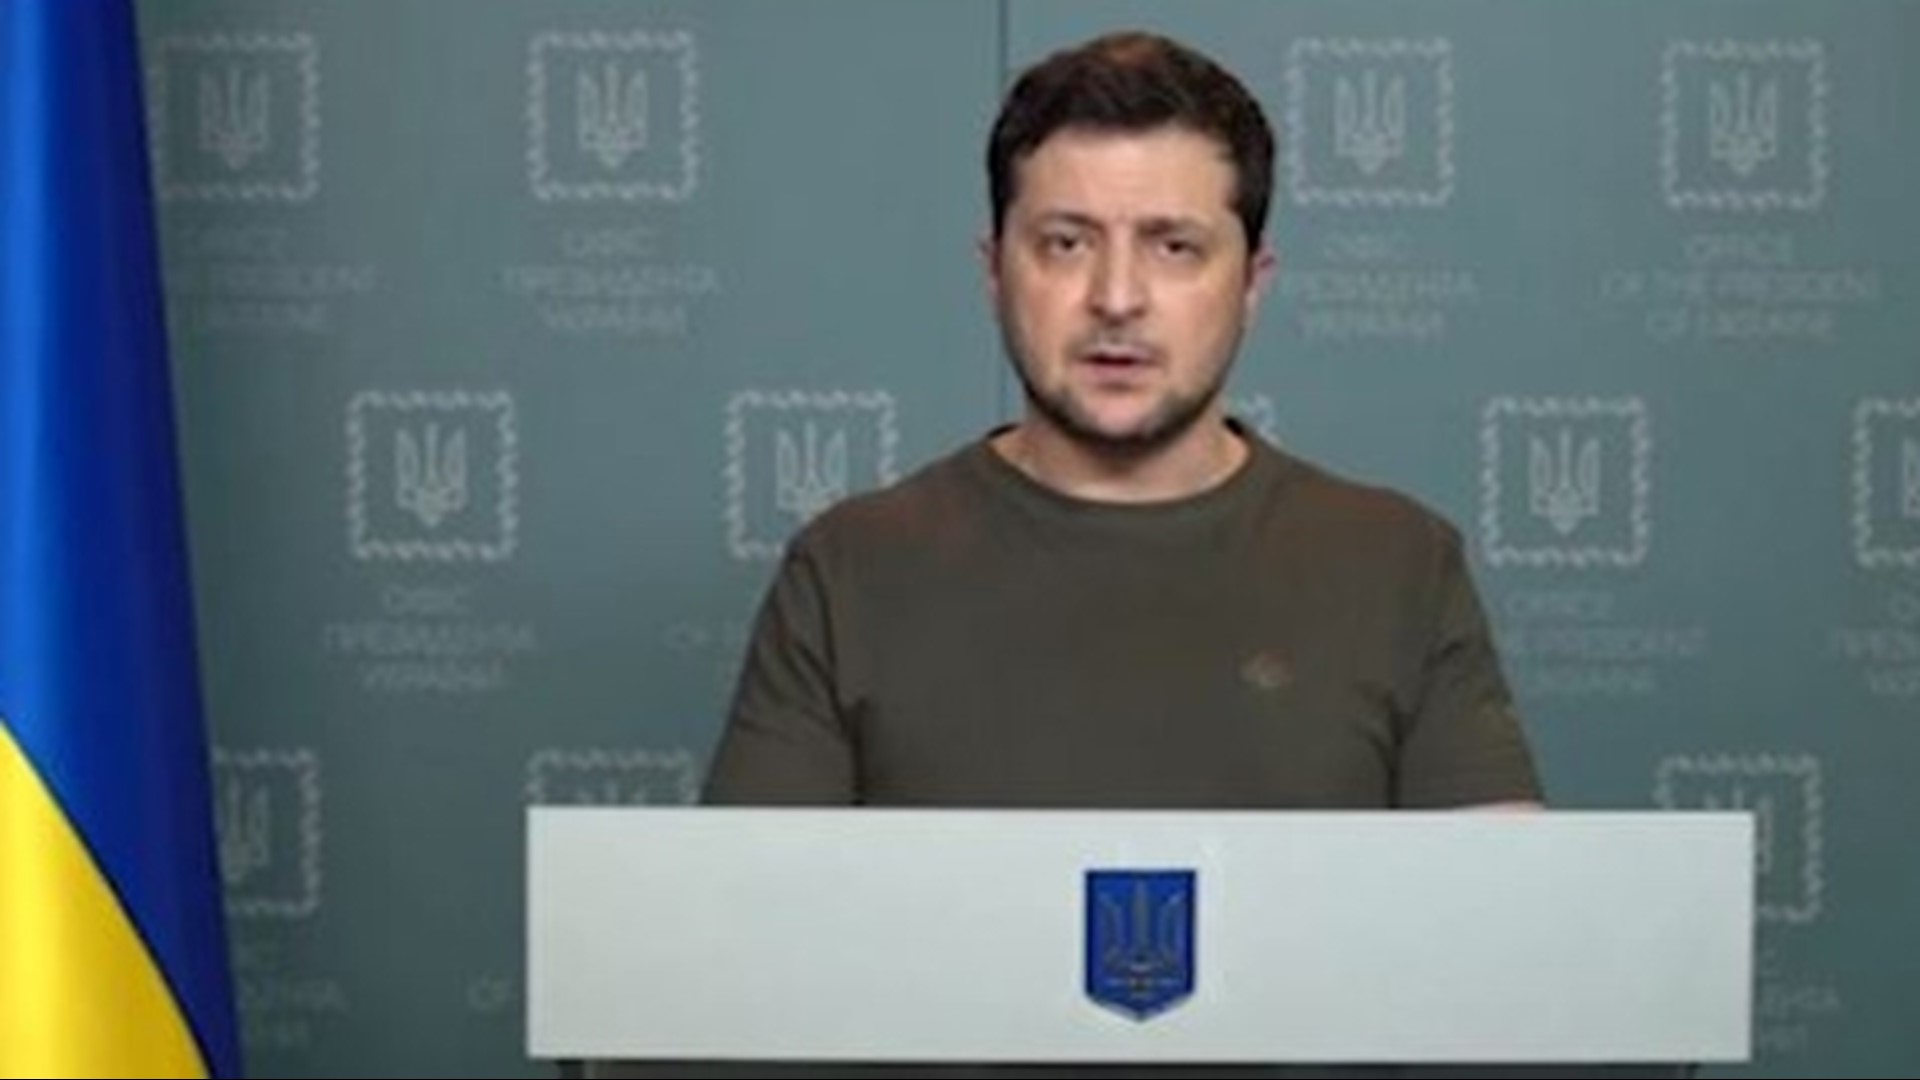 Ukrainian president Volodymyr Zelenskyy referred to Russian troops as "confused children who have been used."